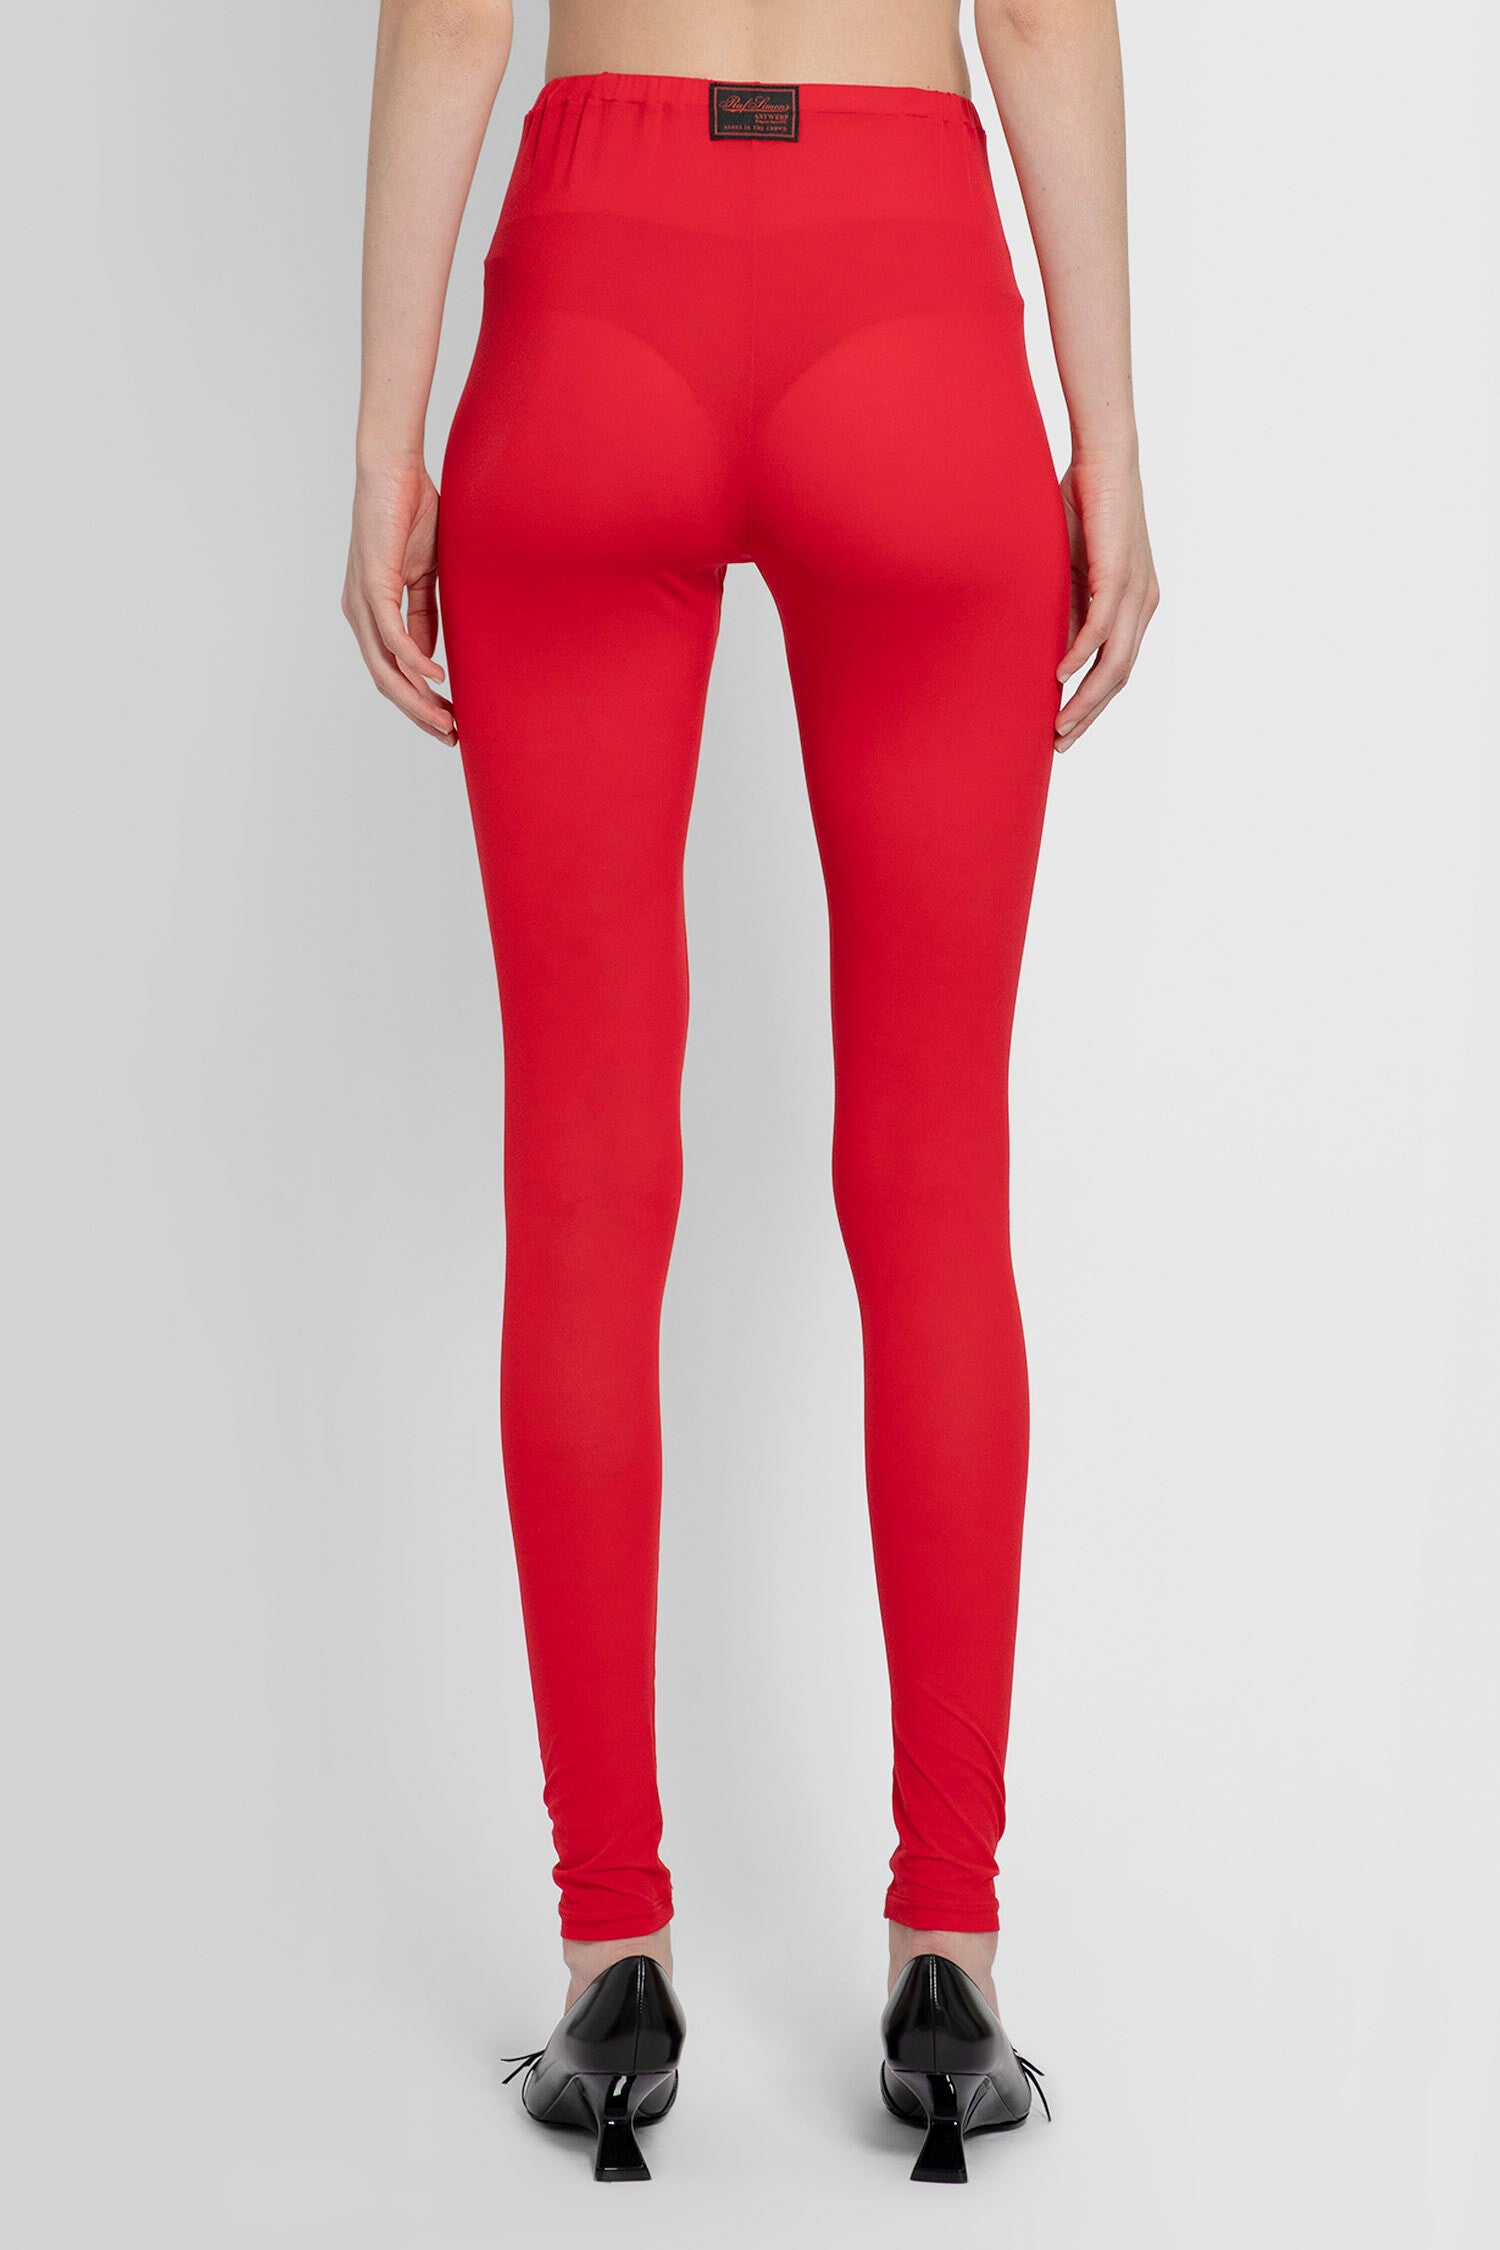 RAF SIMONS WOMAN RED TROUSERS